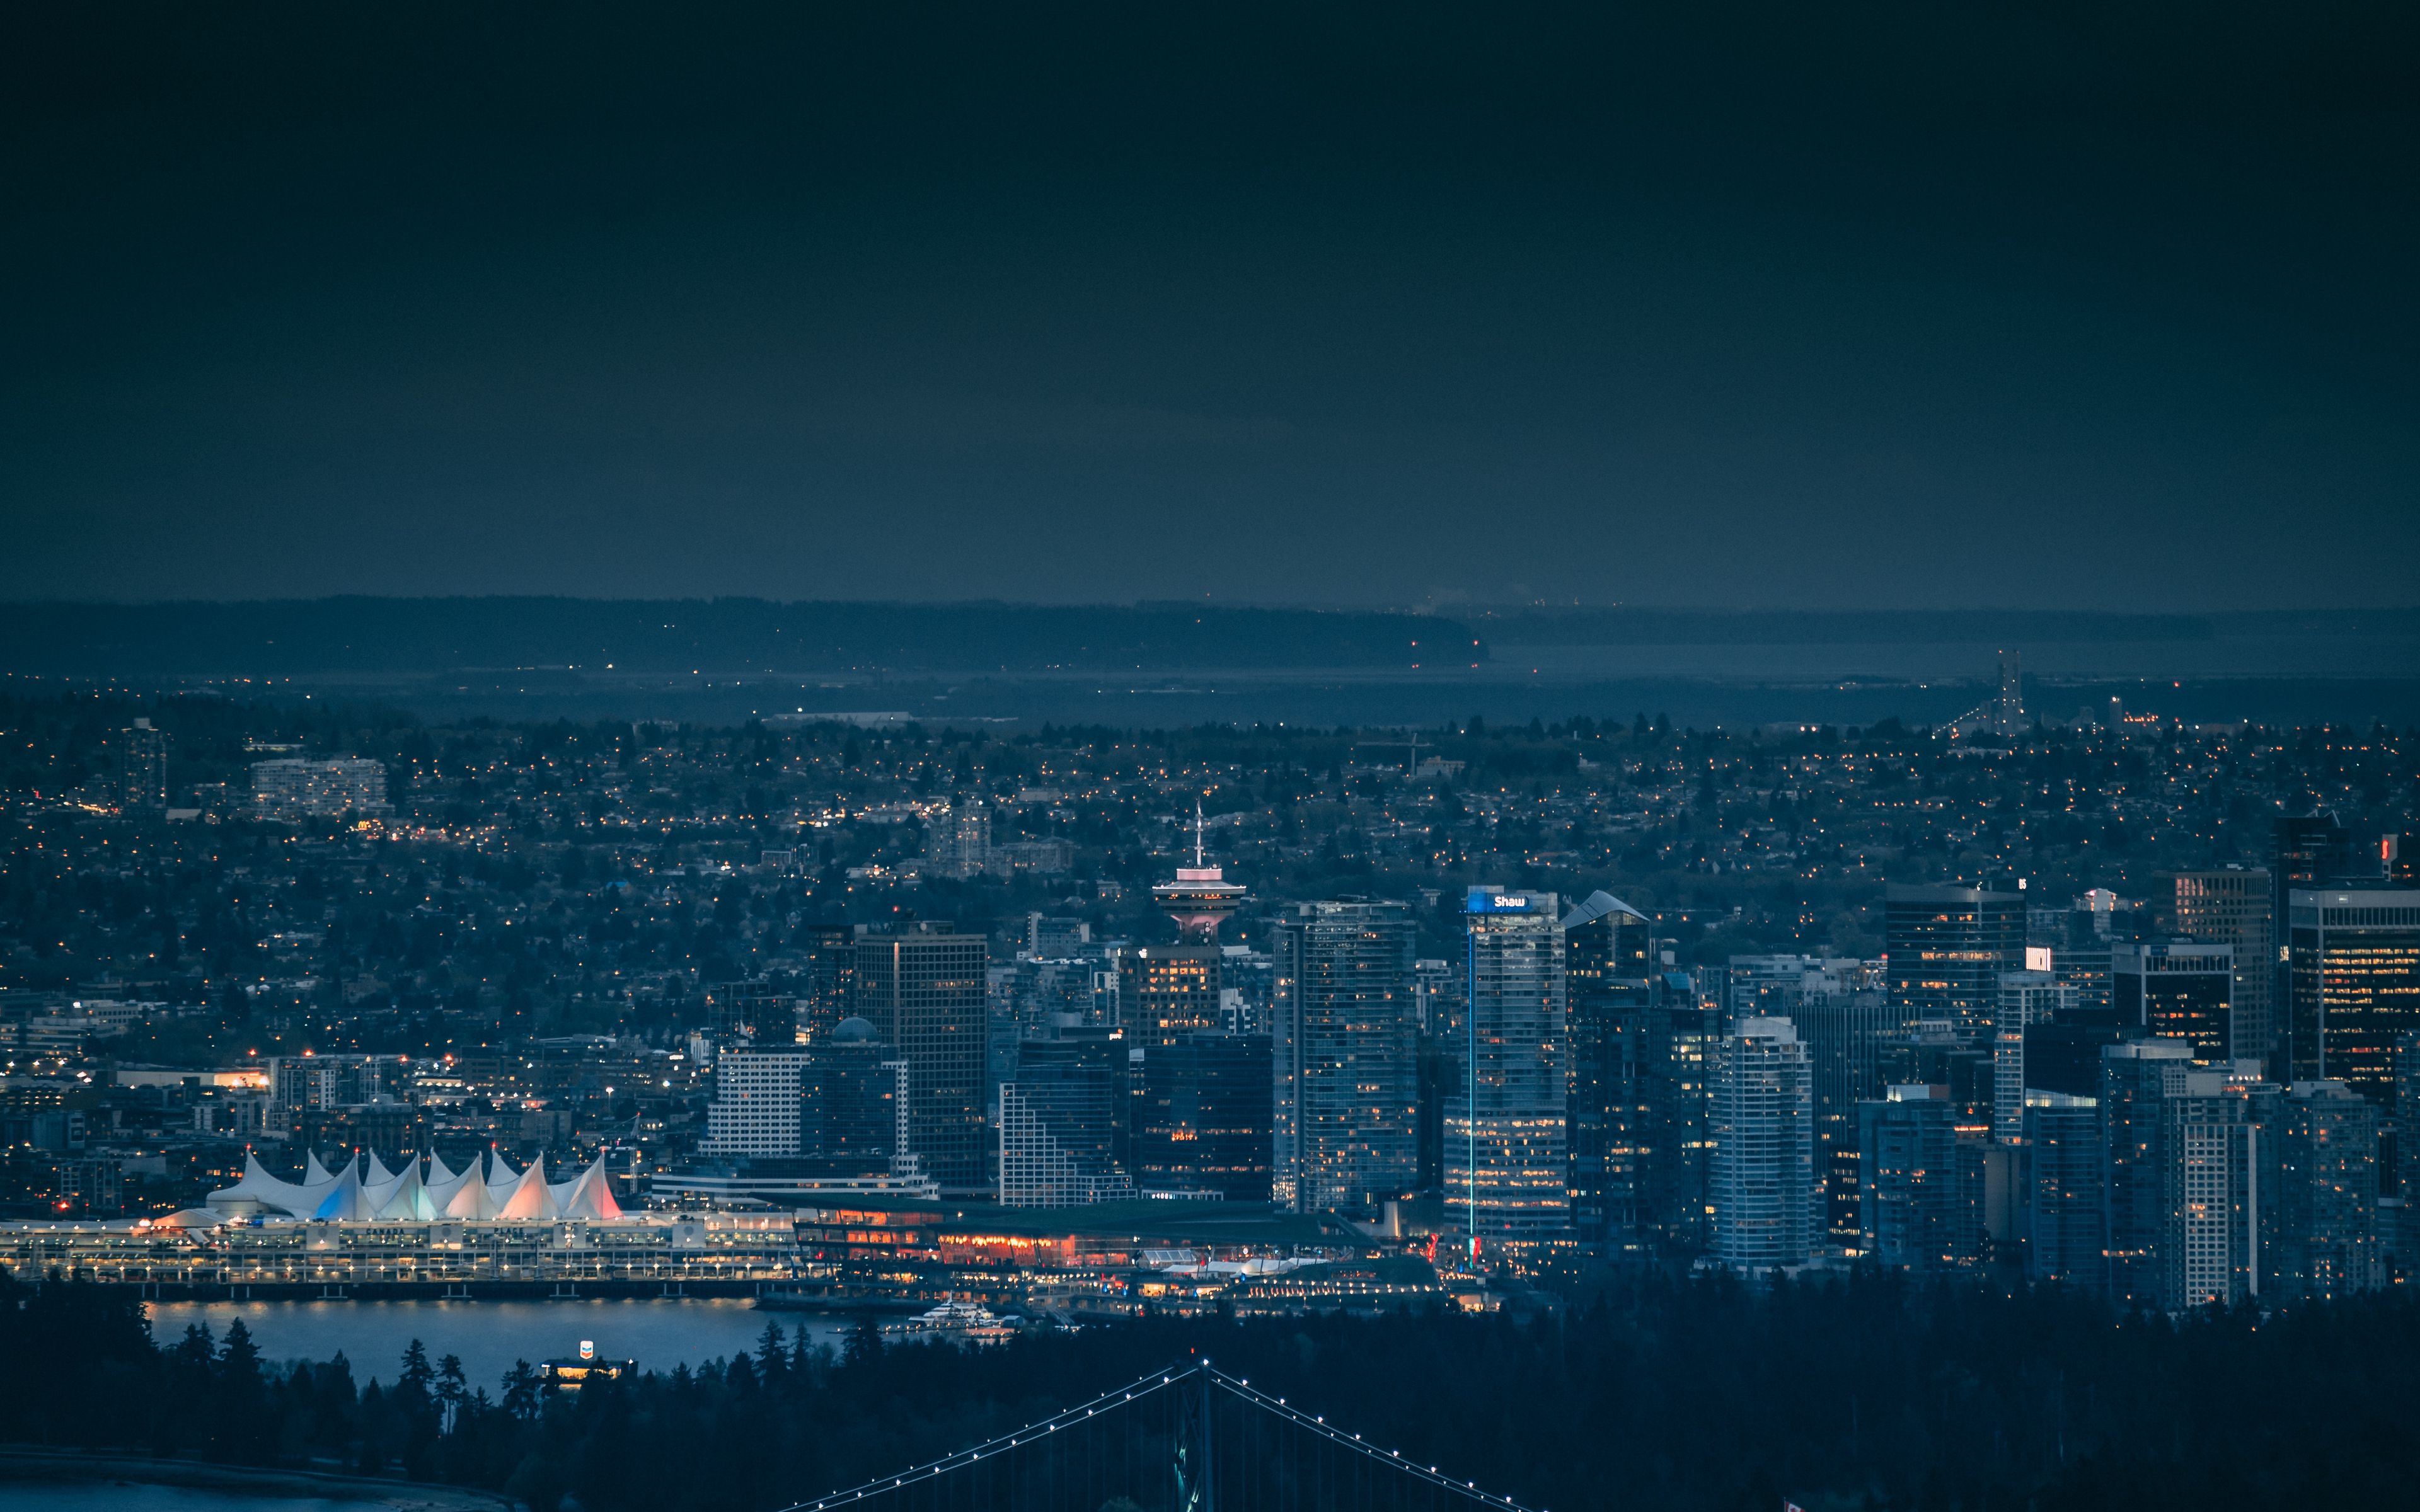 Download wallpaper 3840x2400 metropolis, night, cityscape, darkness, city  lights, vancouver, canada 4k ultra hd 16:10 hd background